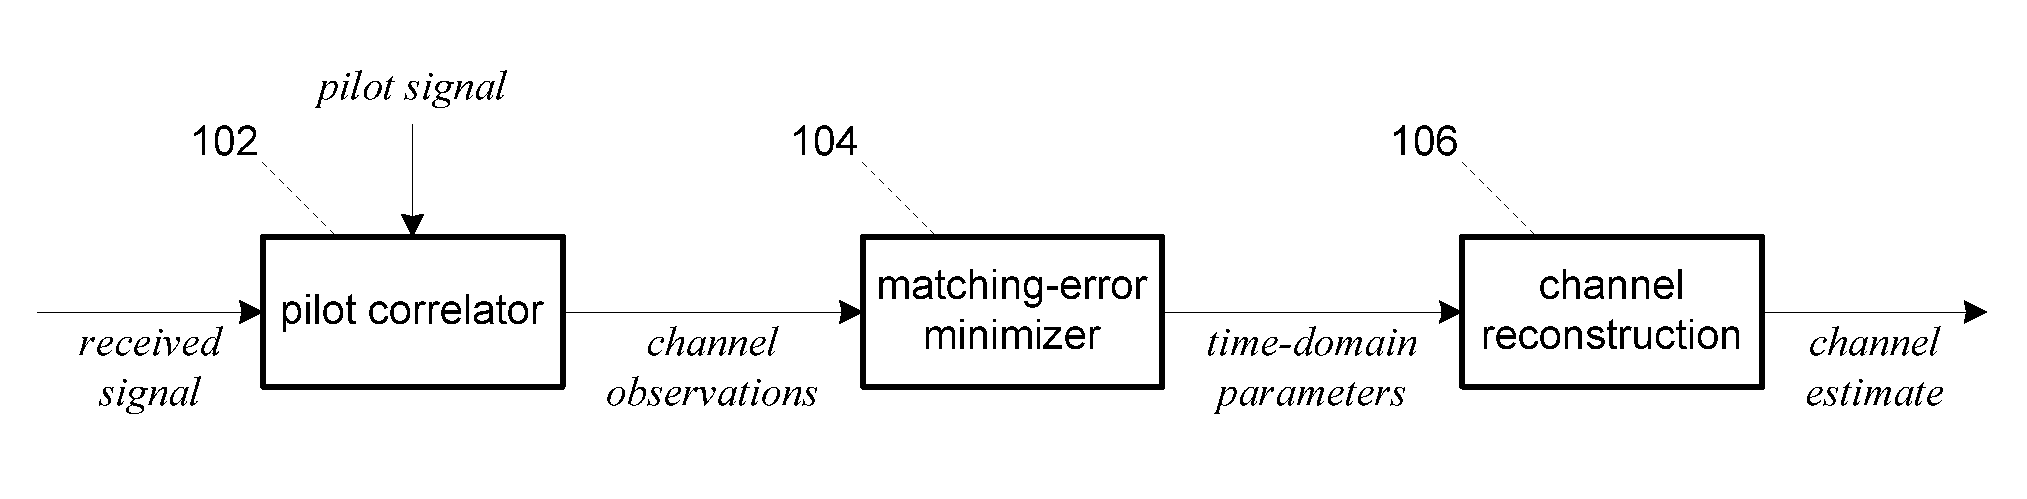 Channel Estimation By Time-Domain Parameter Extraction